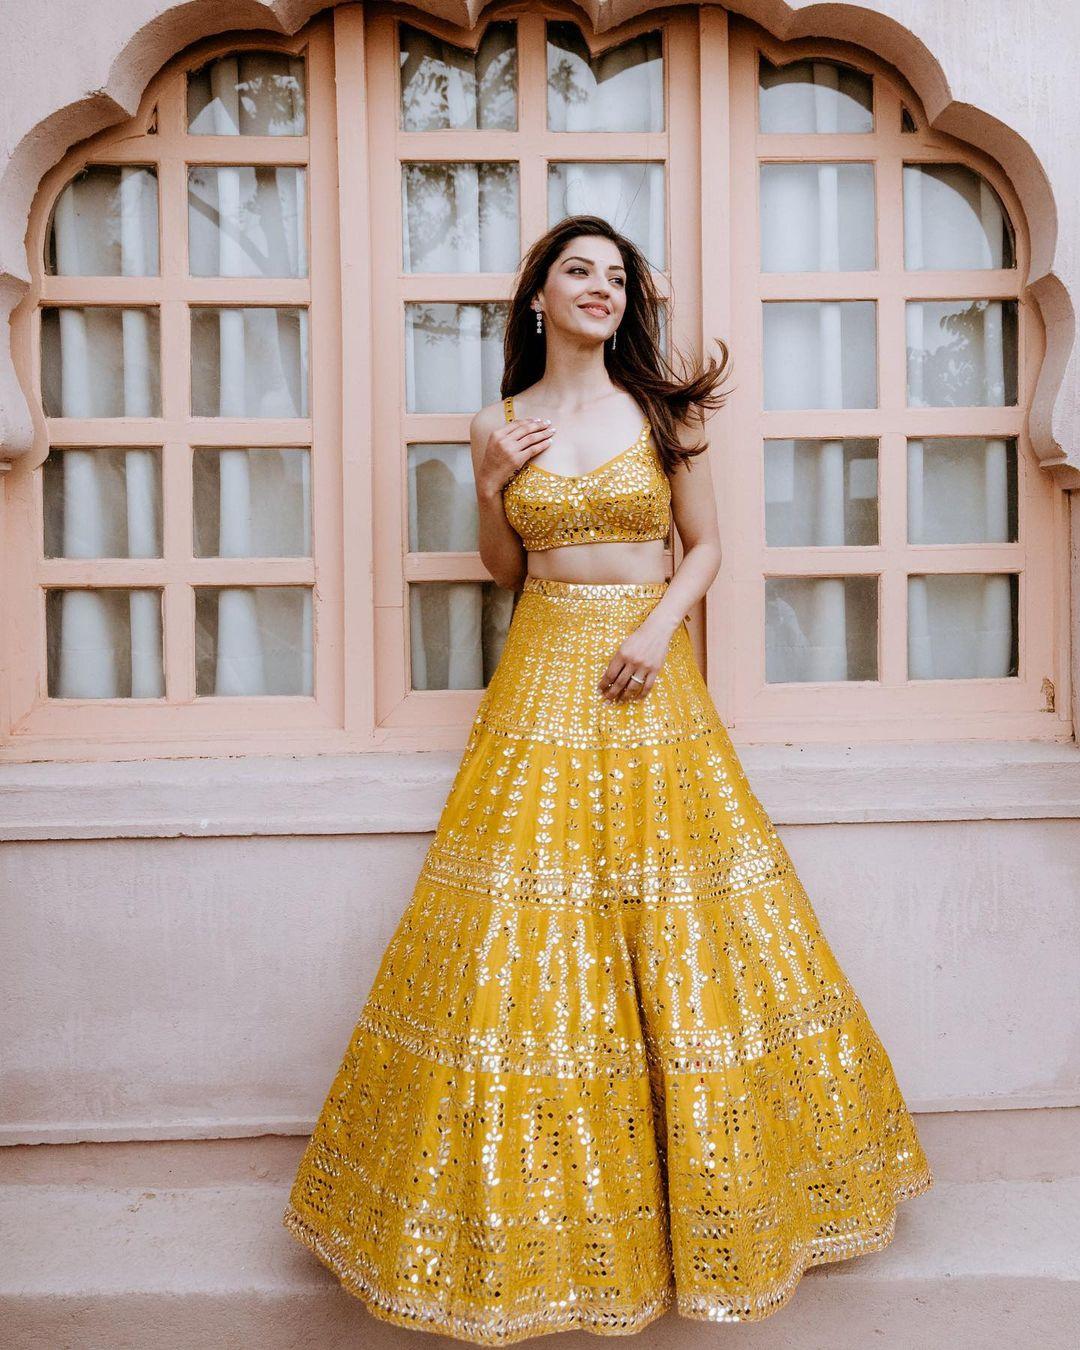 15 Gorgeous Haldi Outfits On Real Brides To Inspire You! - Wedbook | Haldi  ceremony outfit, Haldi outfits, Indian wedding couple photography